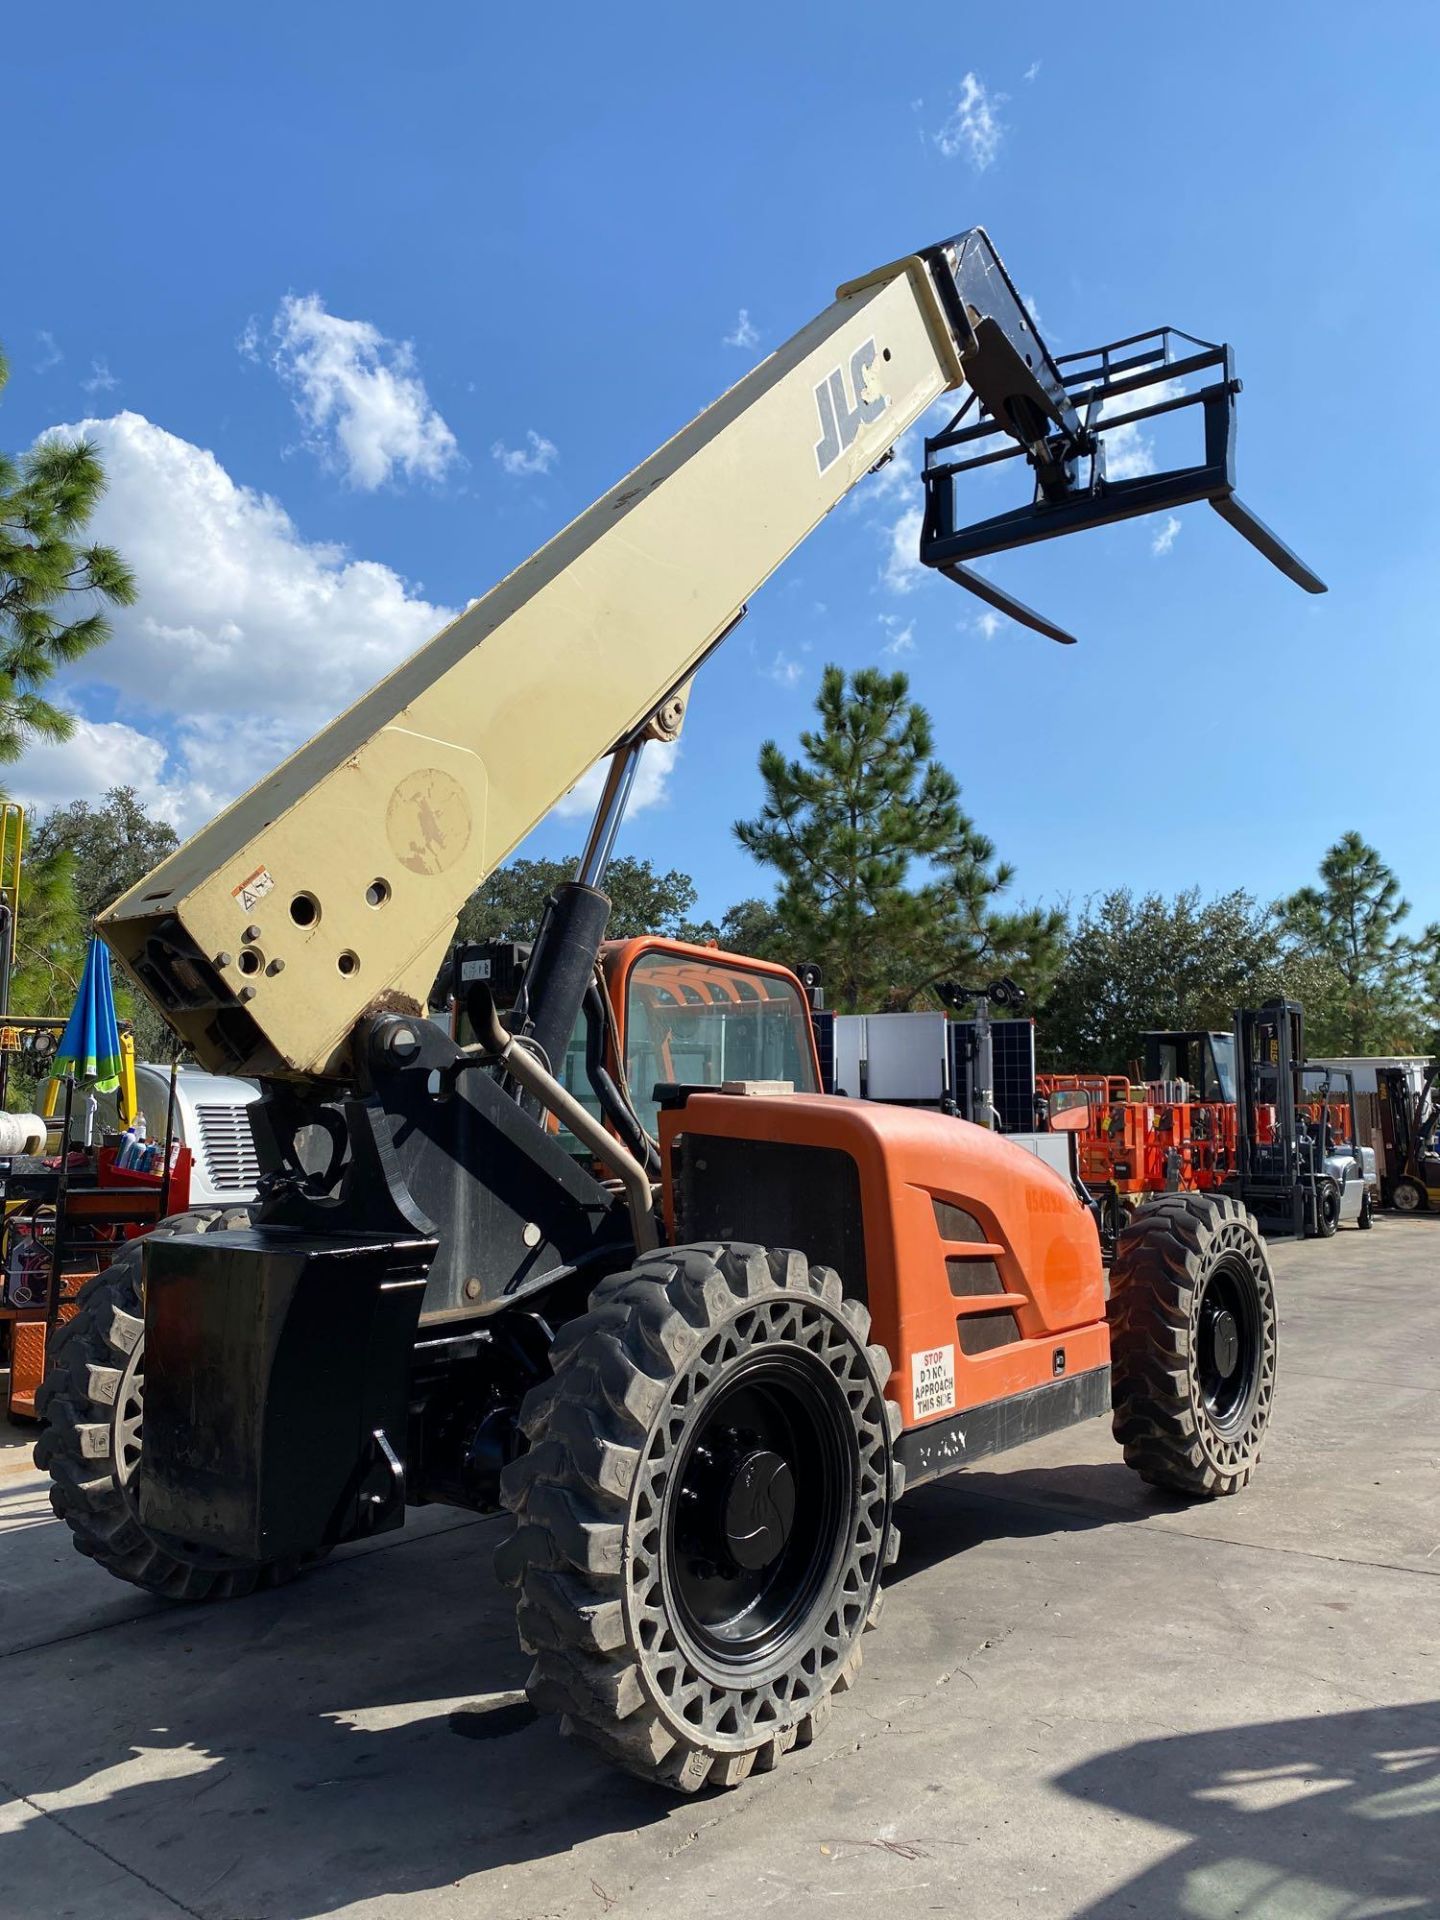 2013 JLG TELESCOPIC FORKLIFT MODEL G9-43A, DIESEL, 4X4,9,000LB CAPACITY, 43' REACH RUNS AND OPERATES - Image 5 of 13